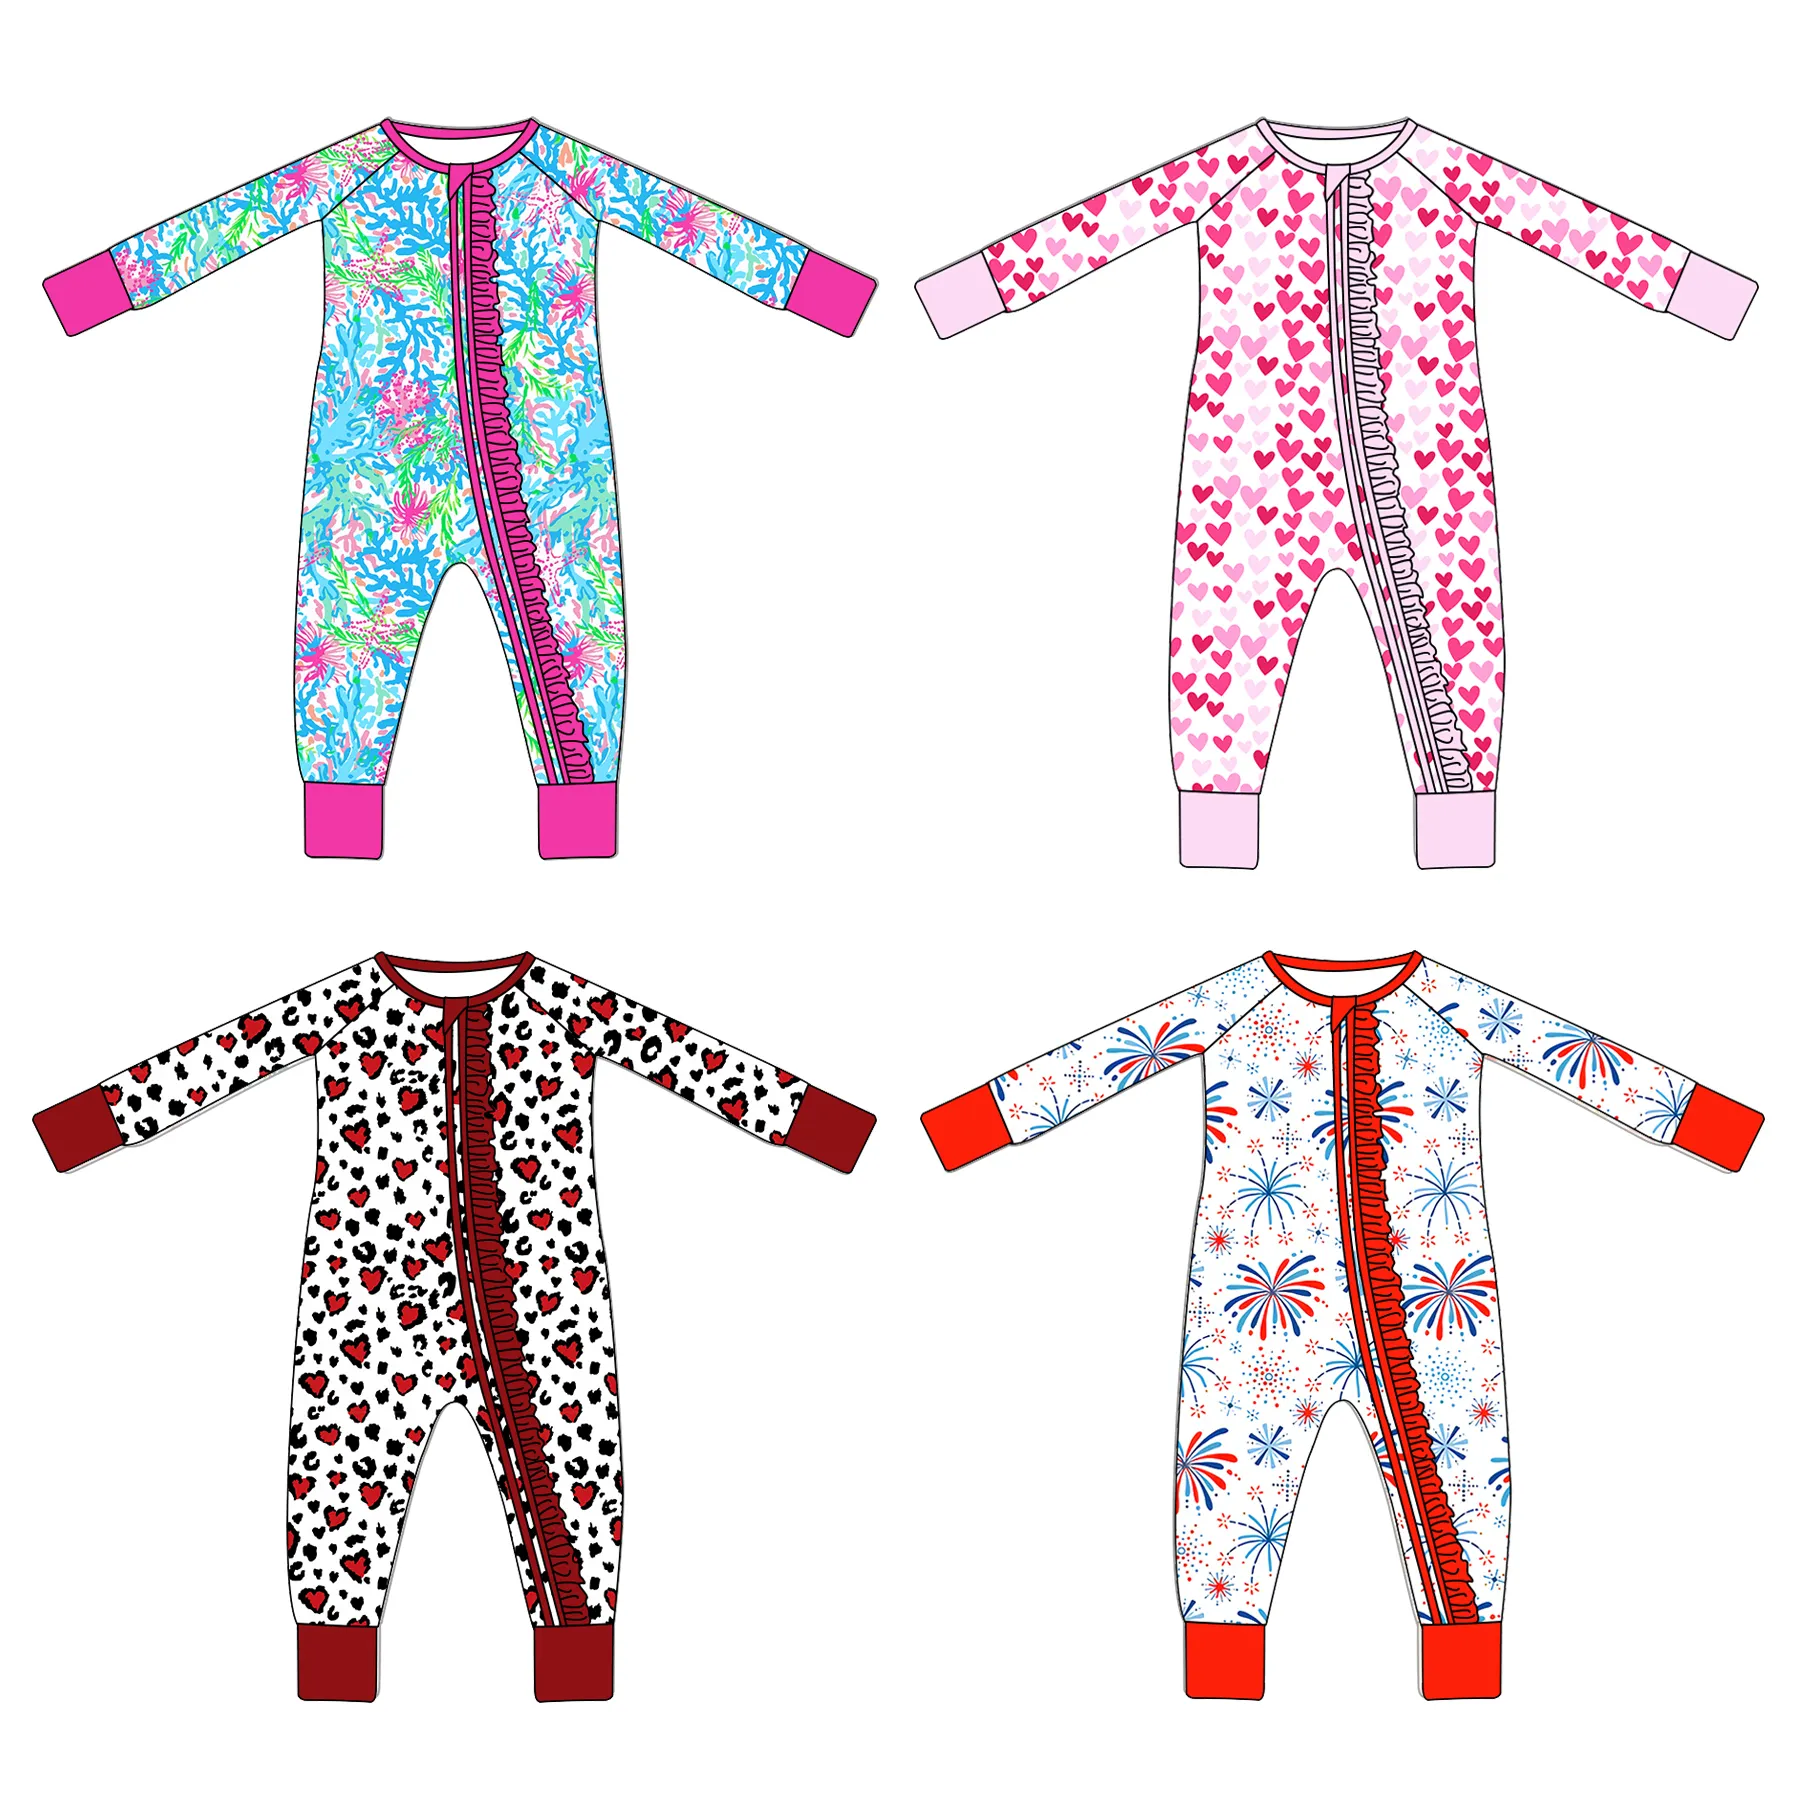 Custom New Born Baby Clothes Sets 0-3 Months For Baby Girls Floral Designs Bubble Rompers 6-12 Months Baby Clothing Sets